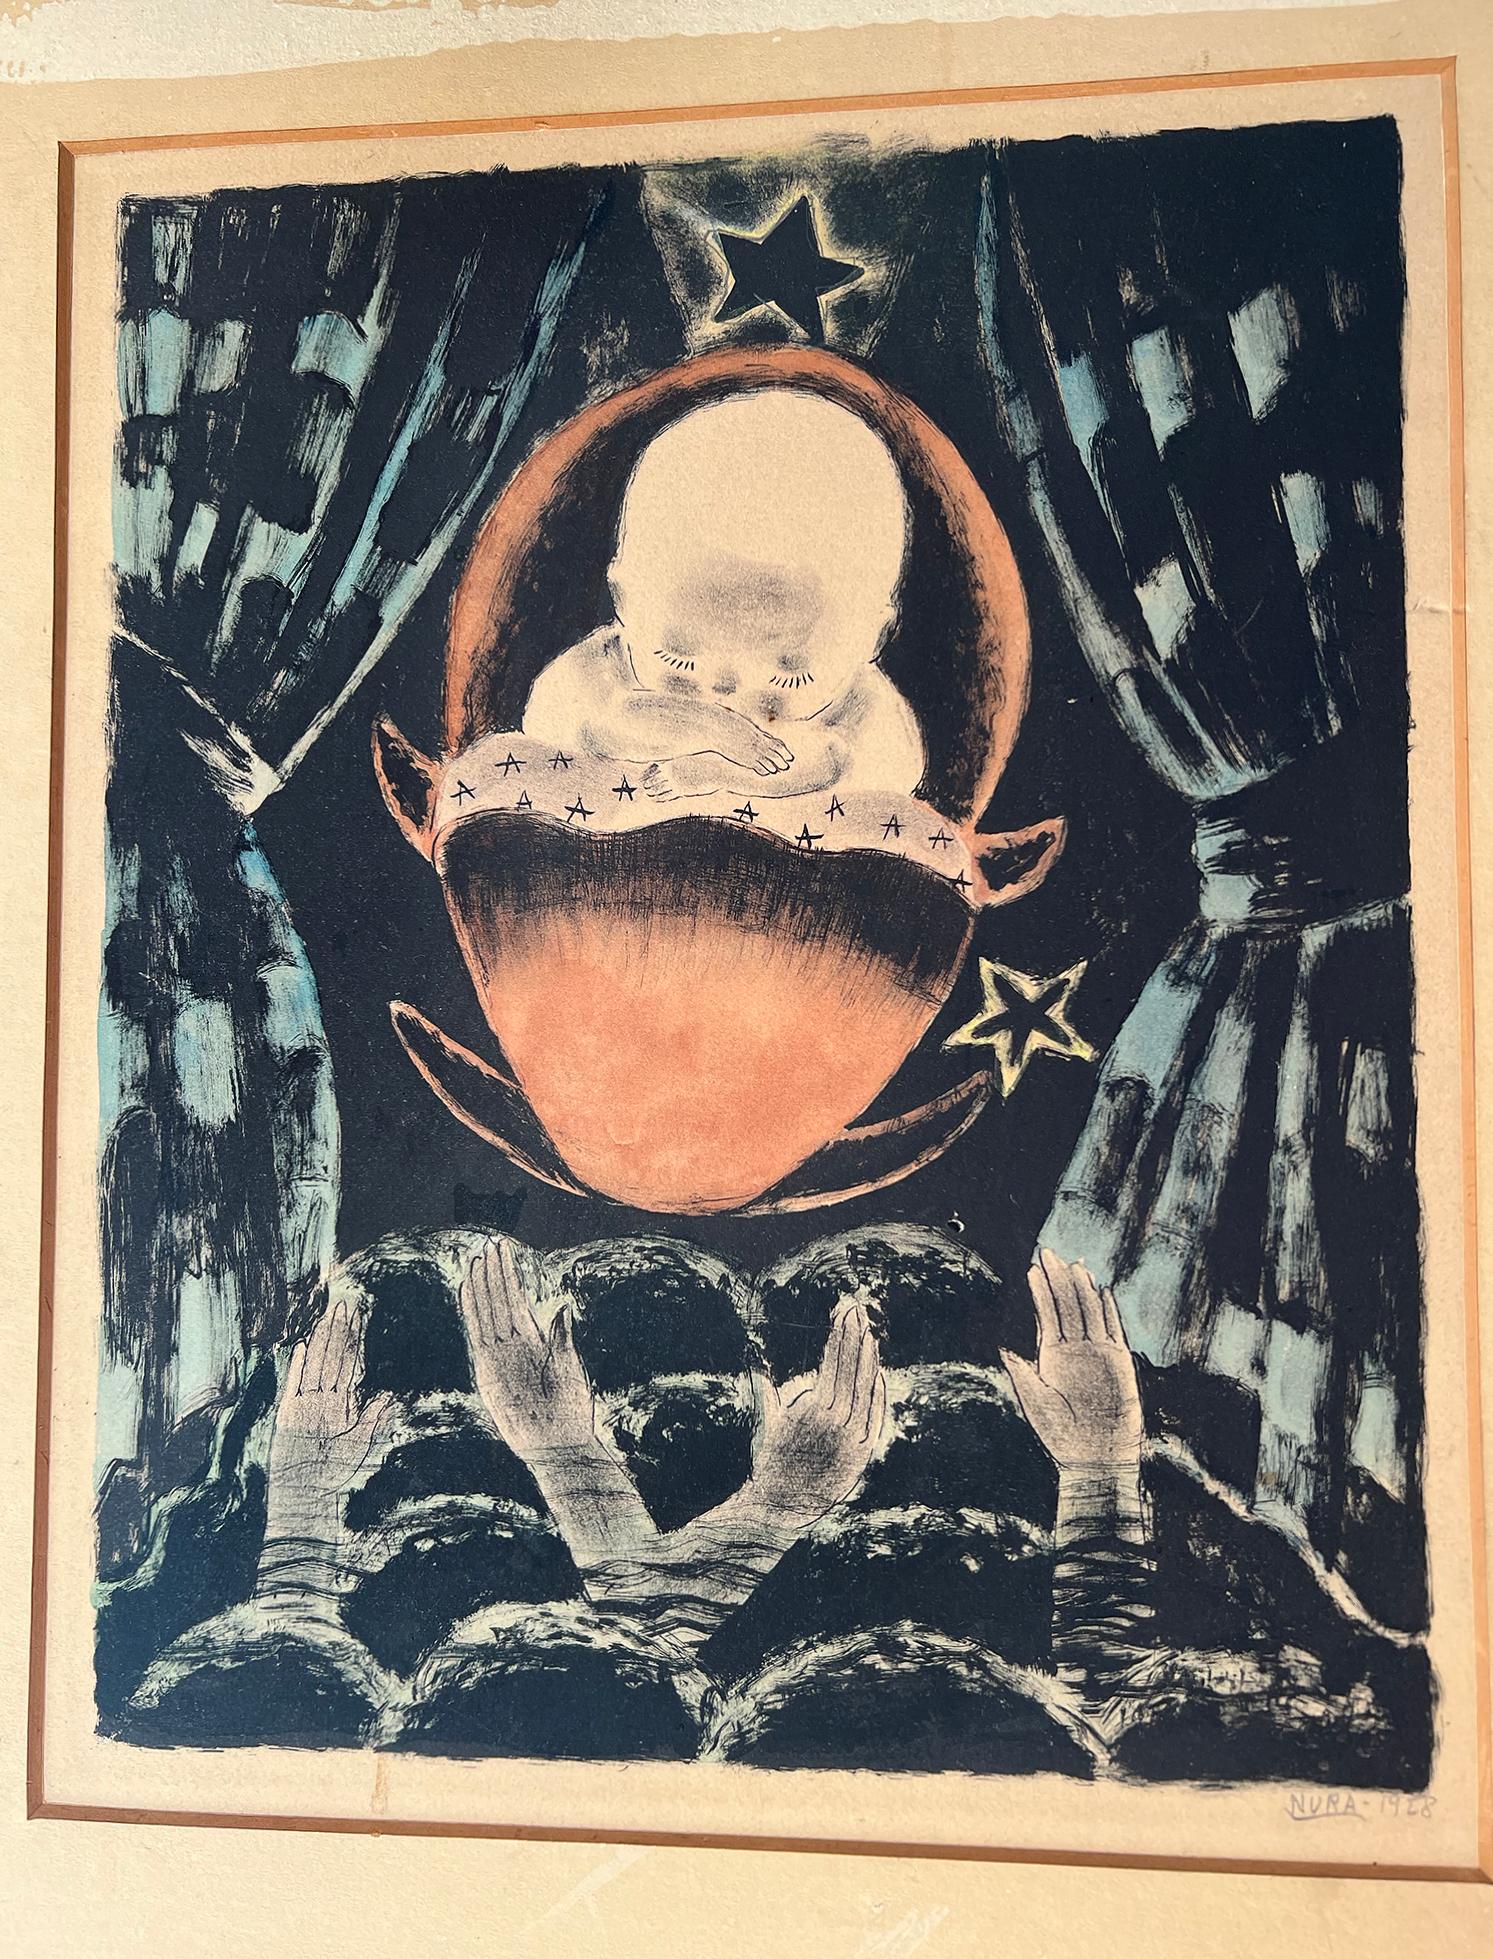 Art Deco - Surreal  Baby Among the Stars in a Theater - Surrealist Print by Nura Ulreich